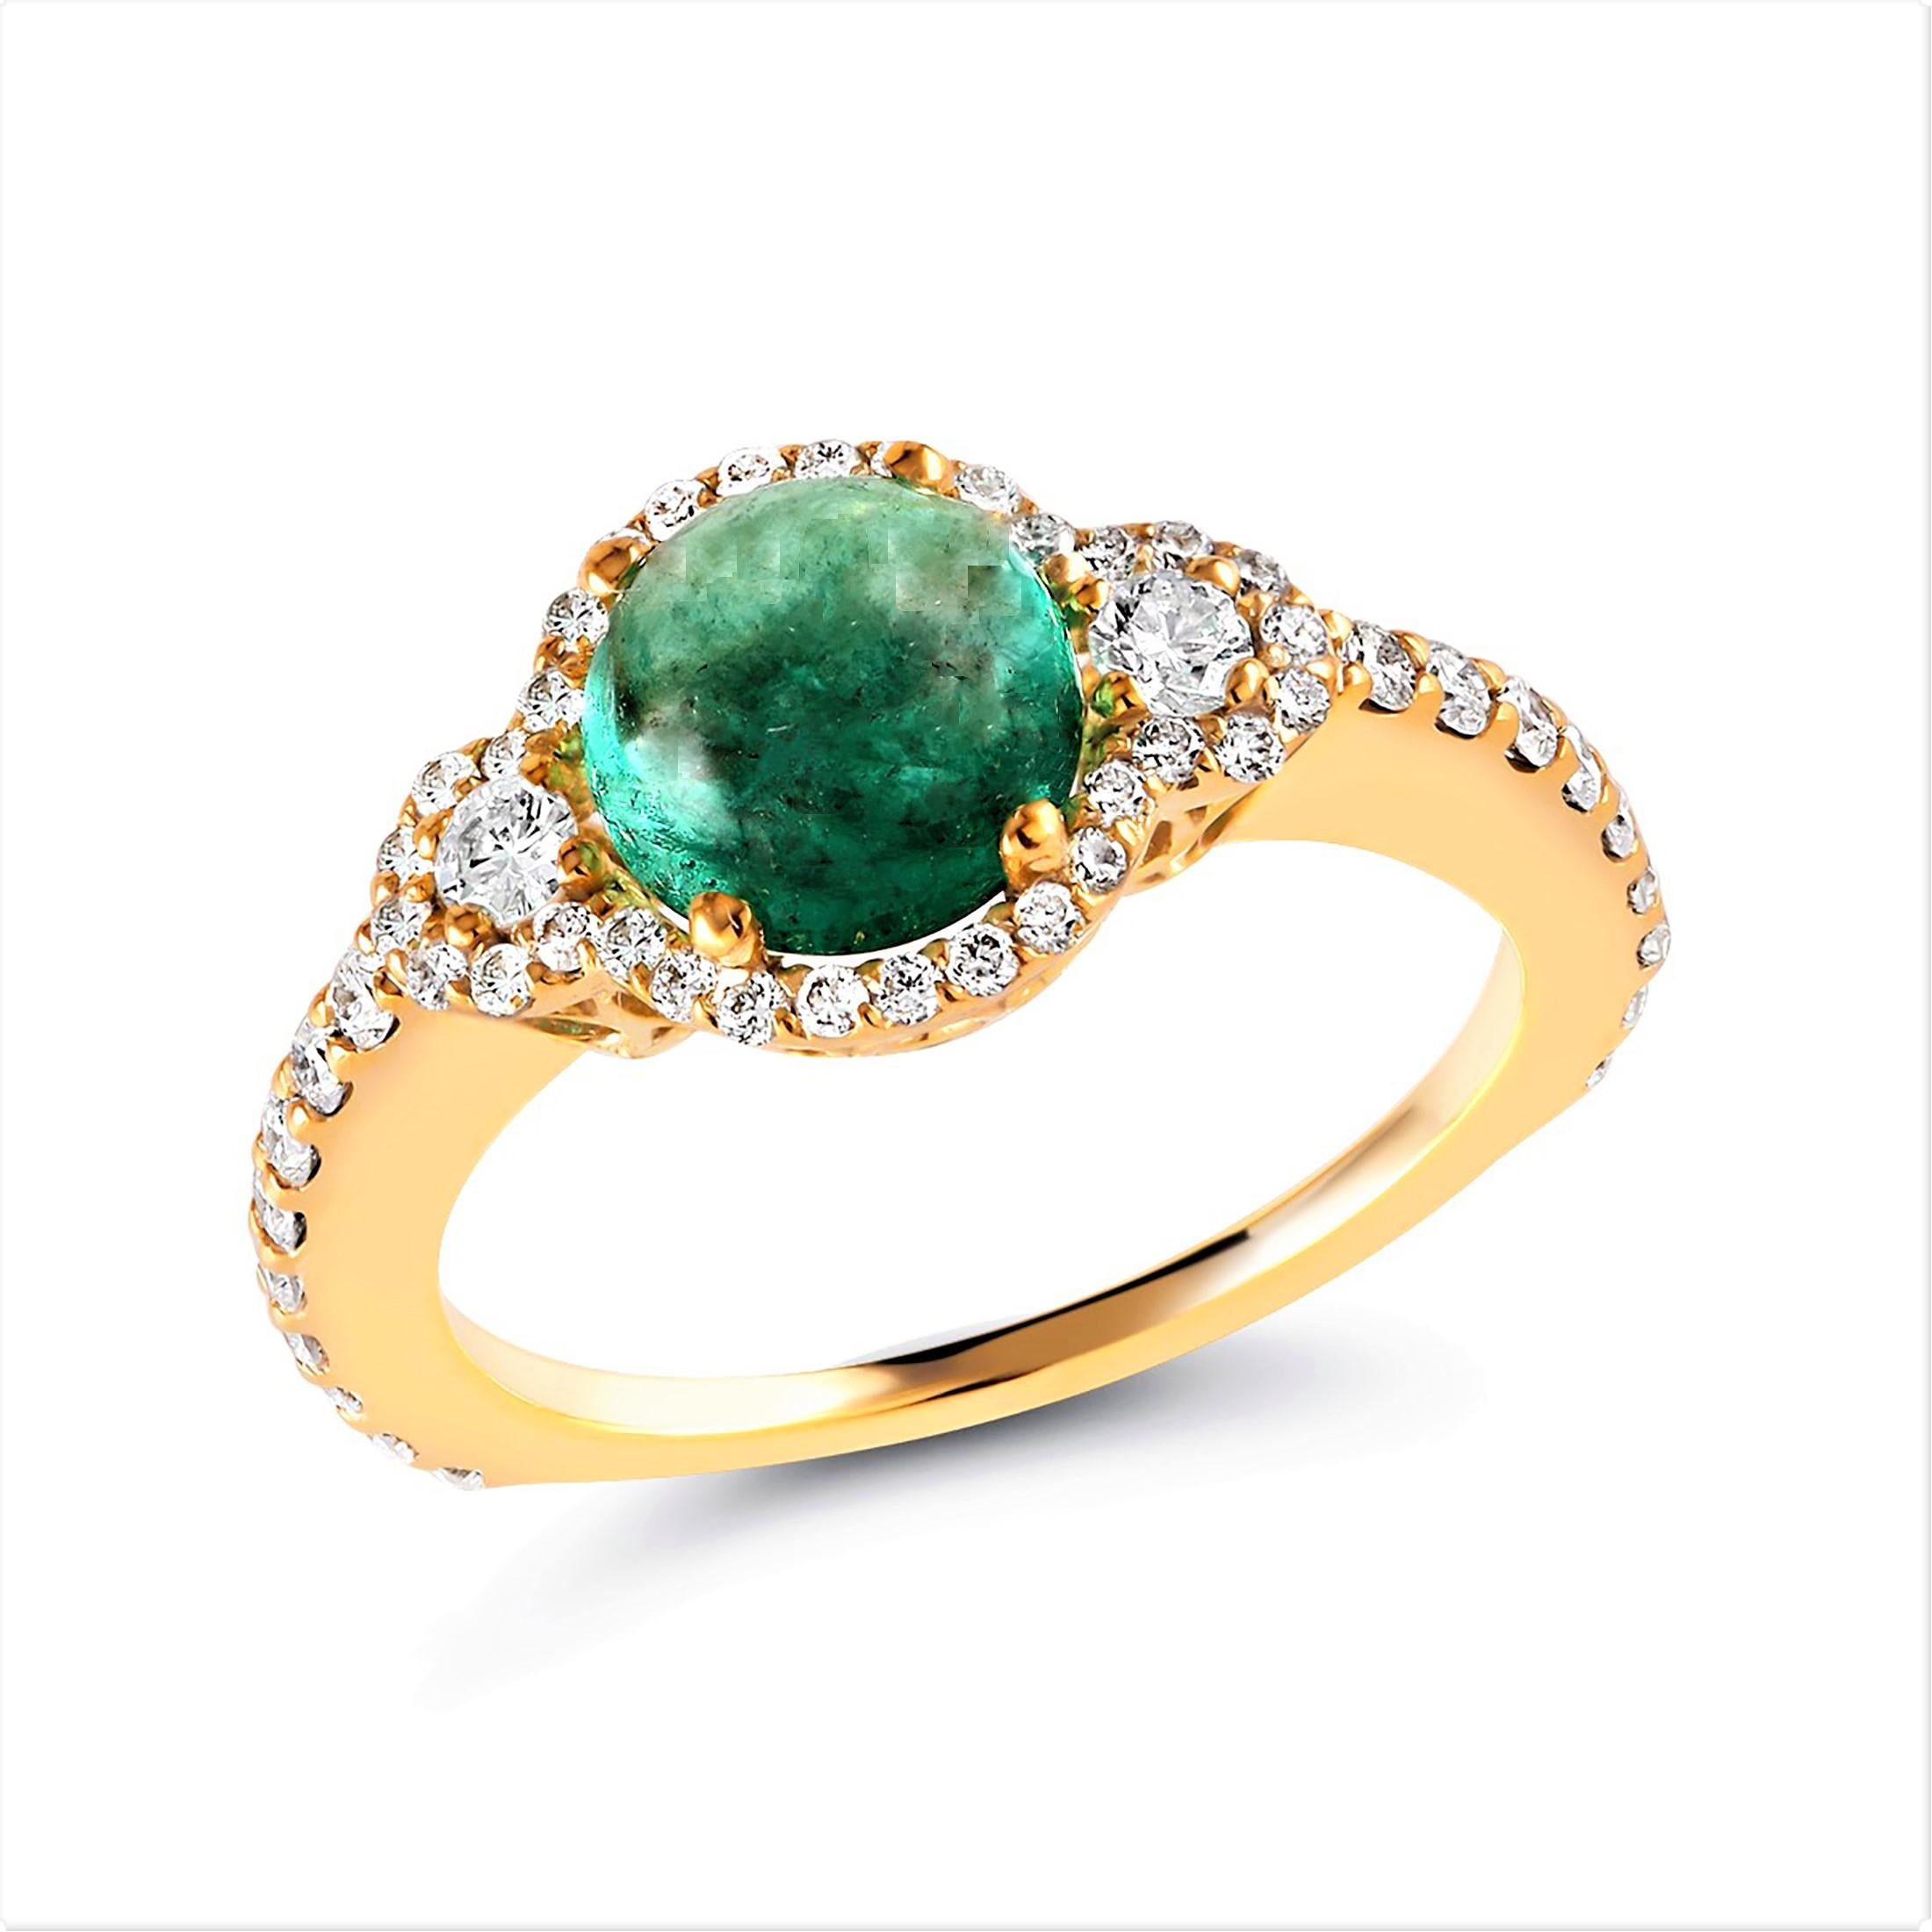 Eighteen karat yellow gold cocktail ring
Cabochon emerald weighing 1.90 carat 
Surrounded by two round diamond weighing 0.30 carat 
Round pave-set diamonds weighing 1.40 carat
Diamond quality G VS
New ring 
Ring finger size 6.25 In Stock
Ring can be